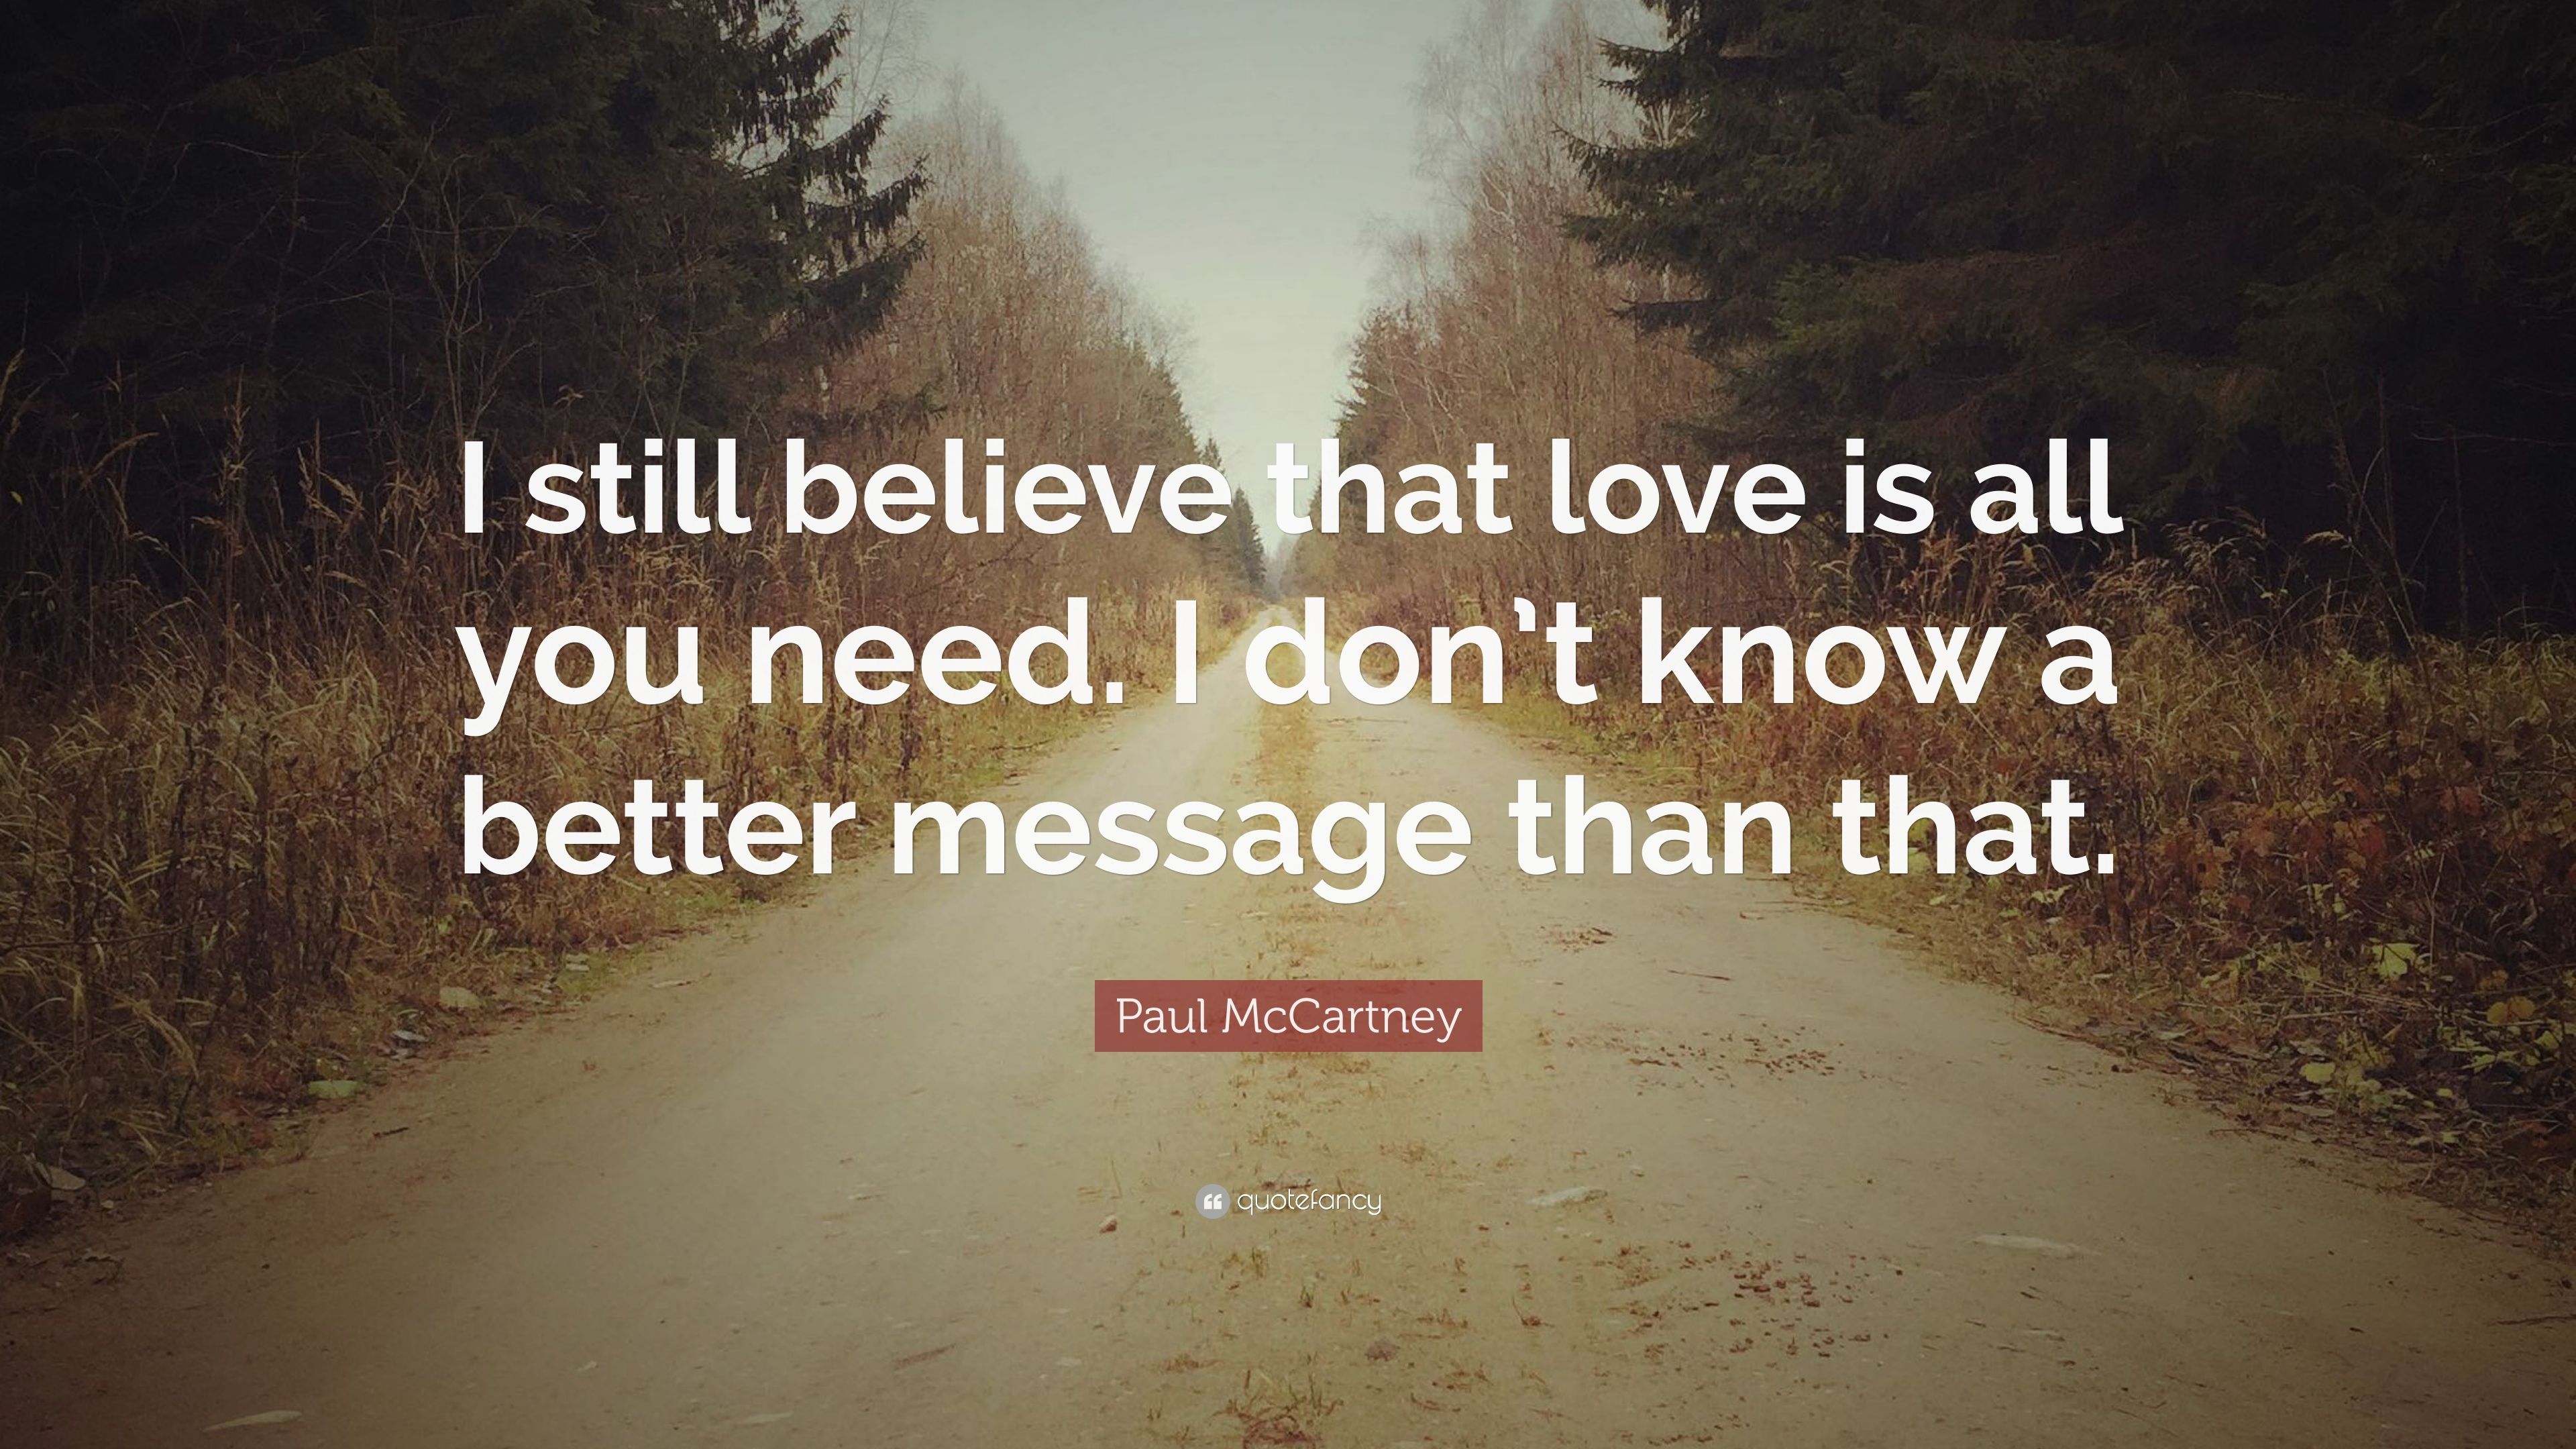 Paul McCartney Quote: “I still believe that love is all you need